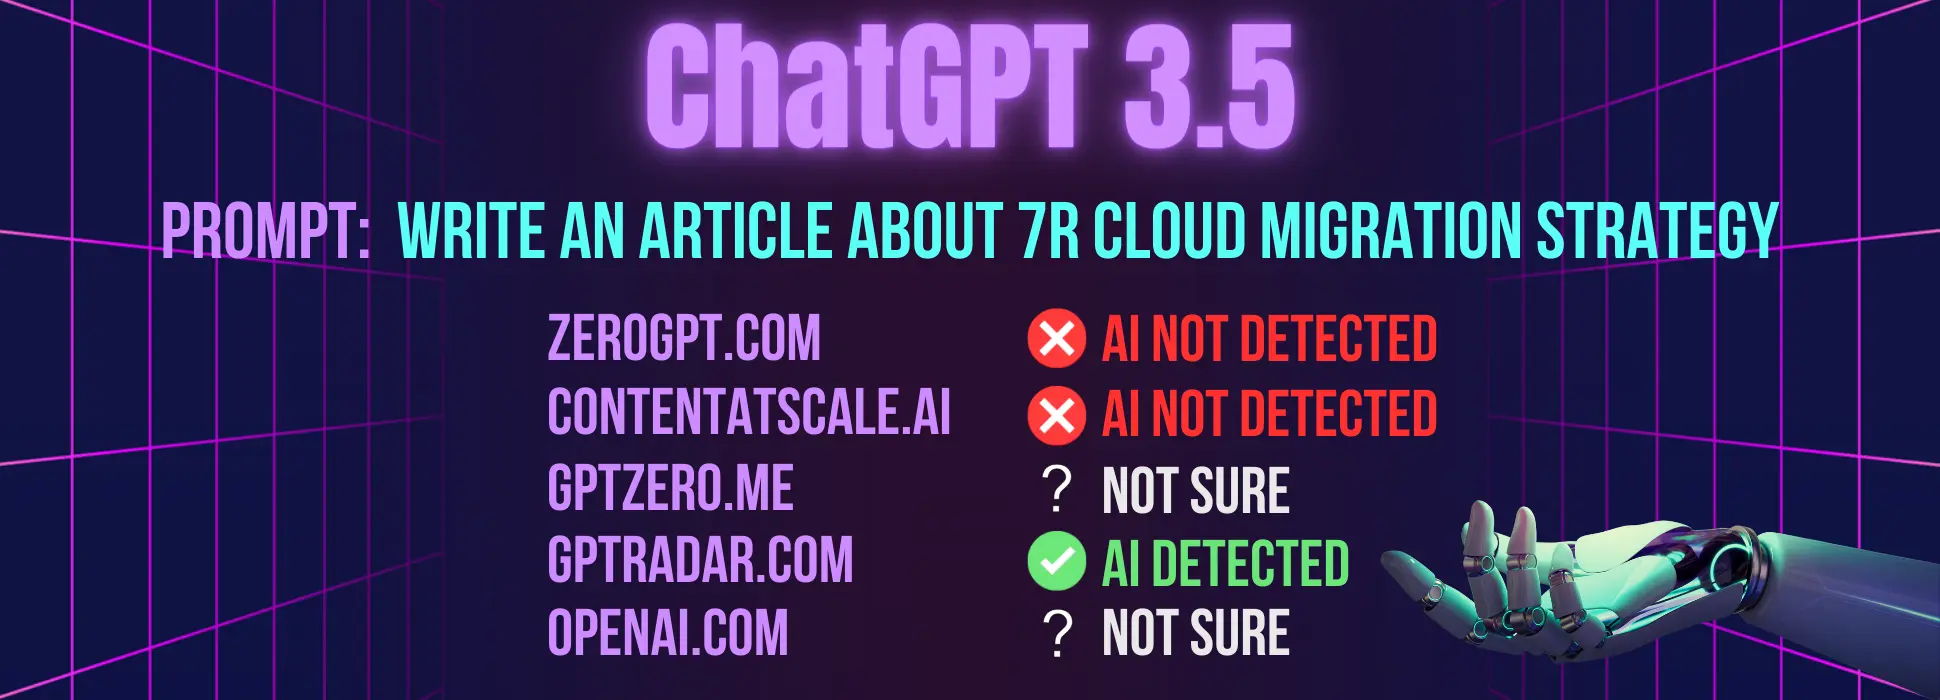 ChatGPT 3.5 results for prompt #1